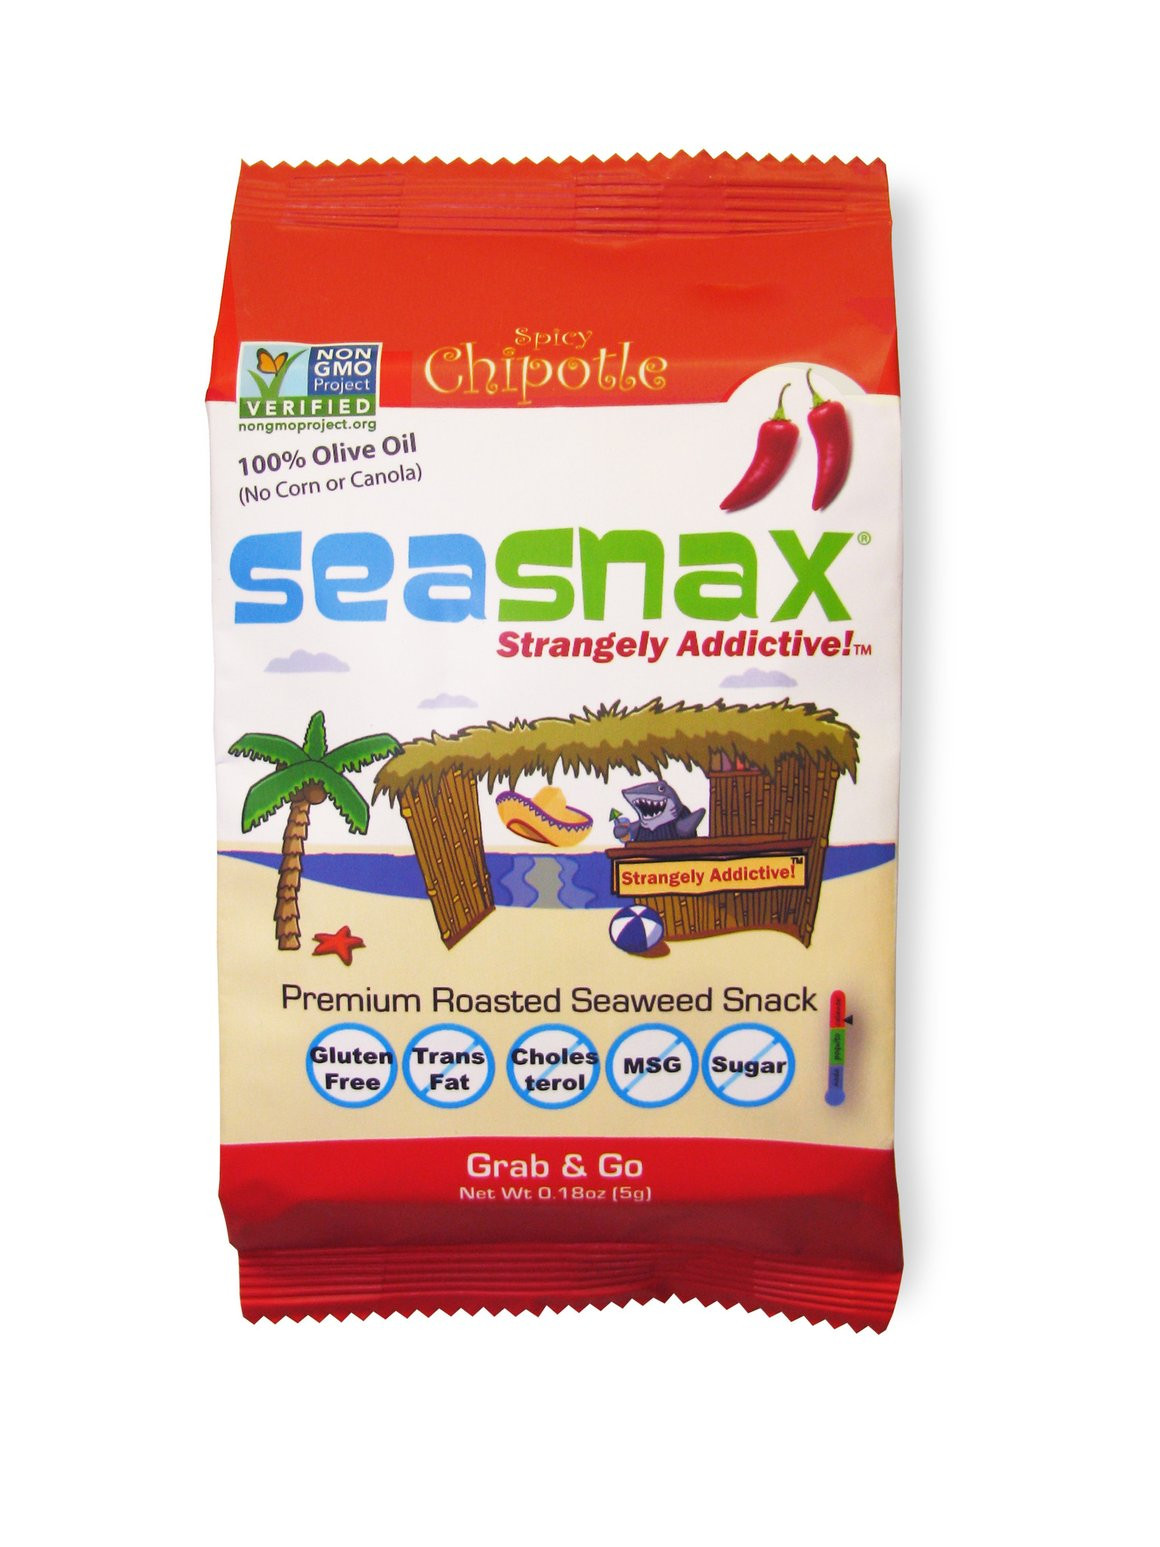 expert hardwood flooring ontario of all products goodness me throughout seasnax seaweed snack spicy chipotle 5g goodness me 1